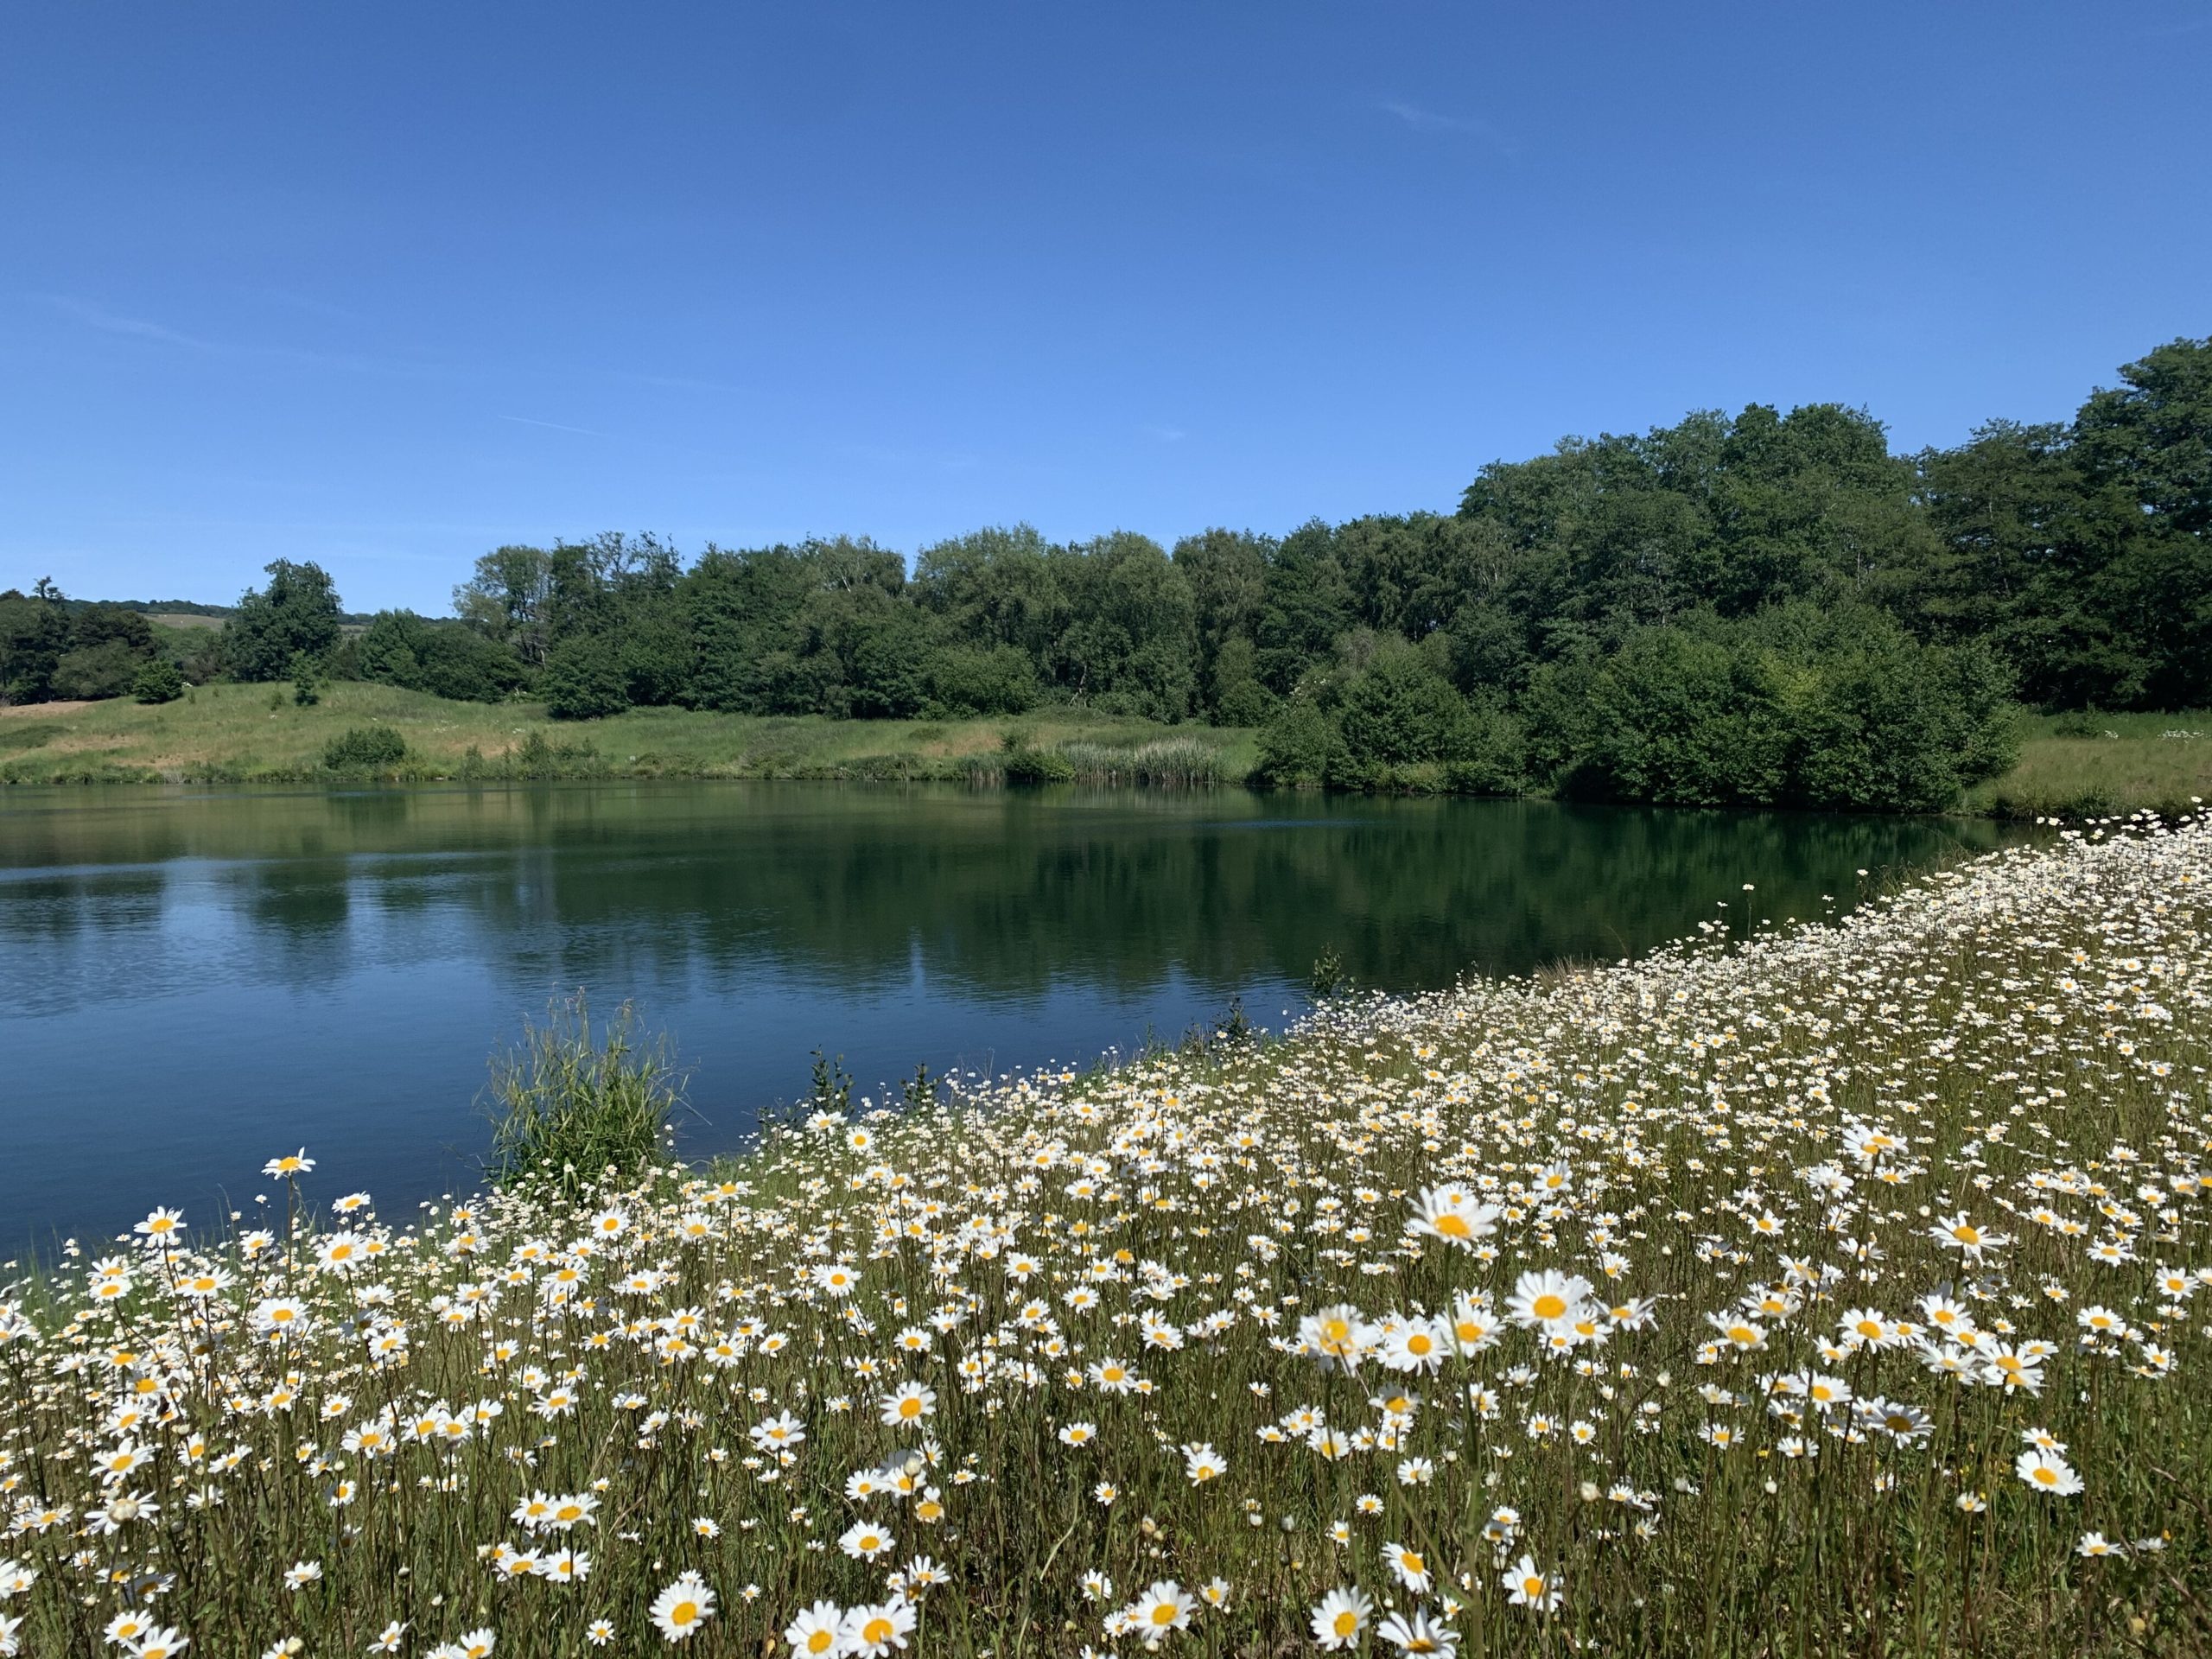 Wildflowers at Buckland Park Lake